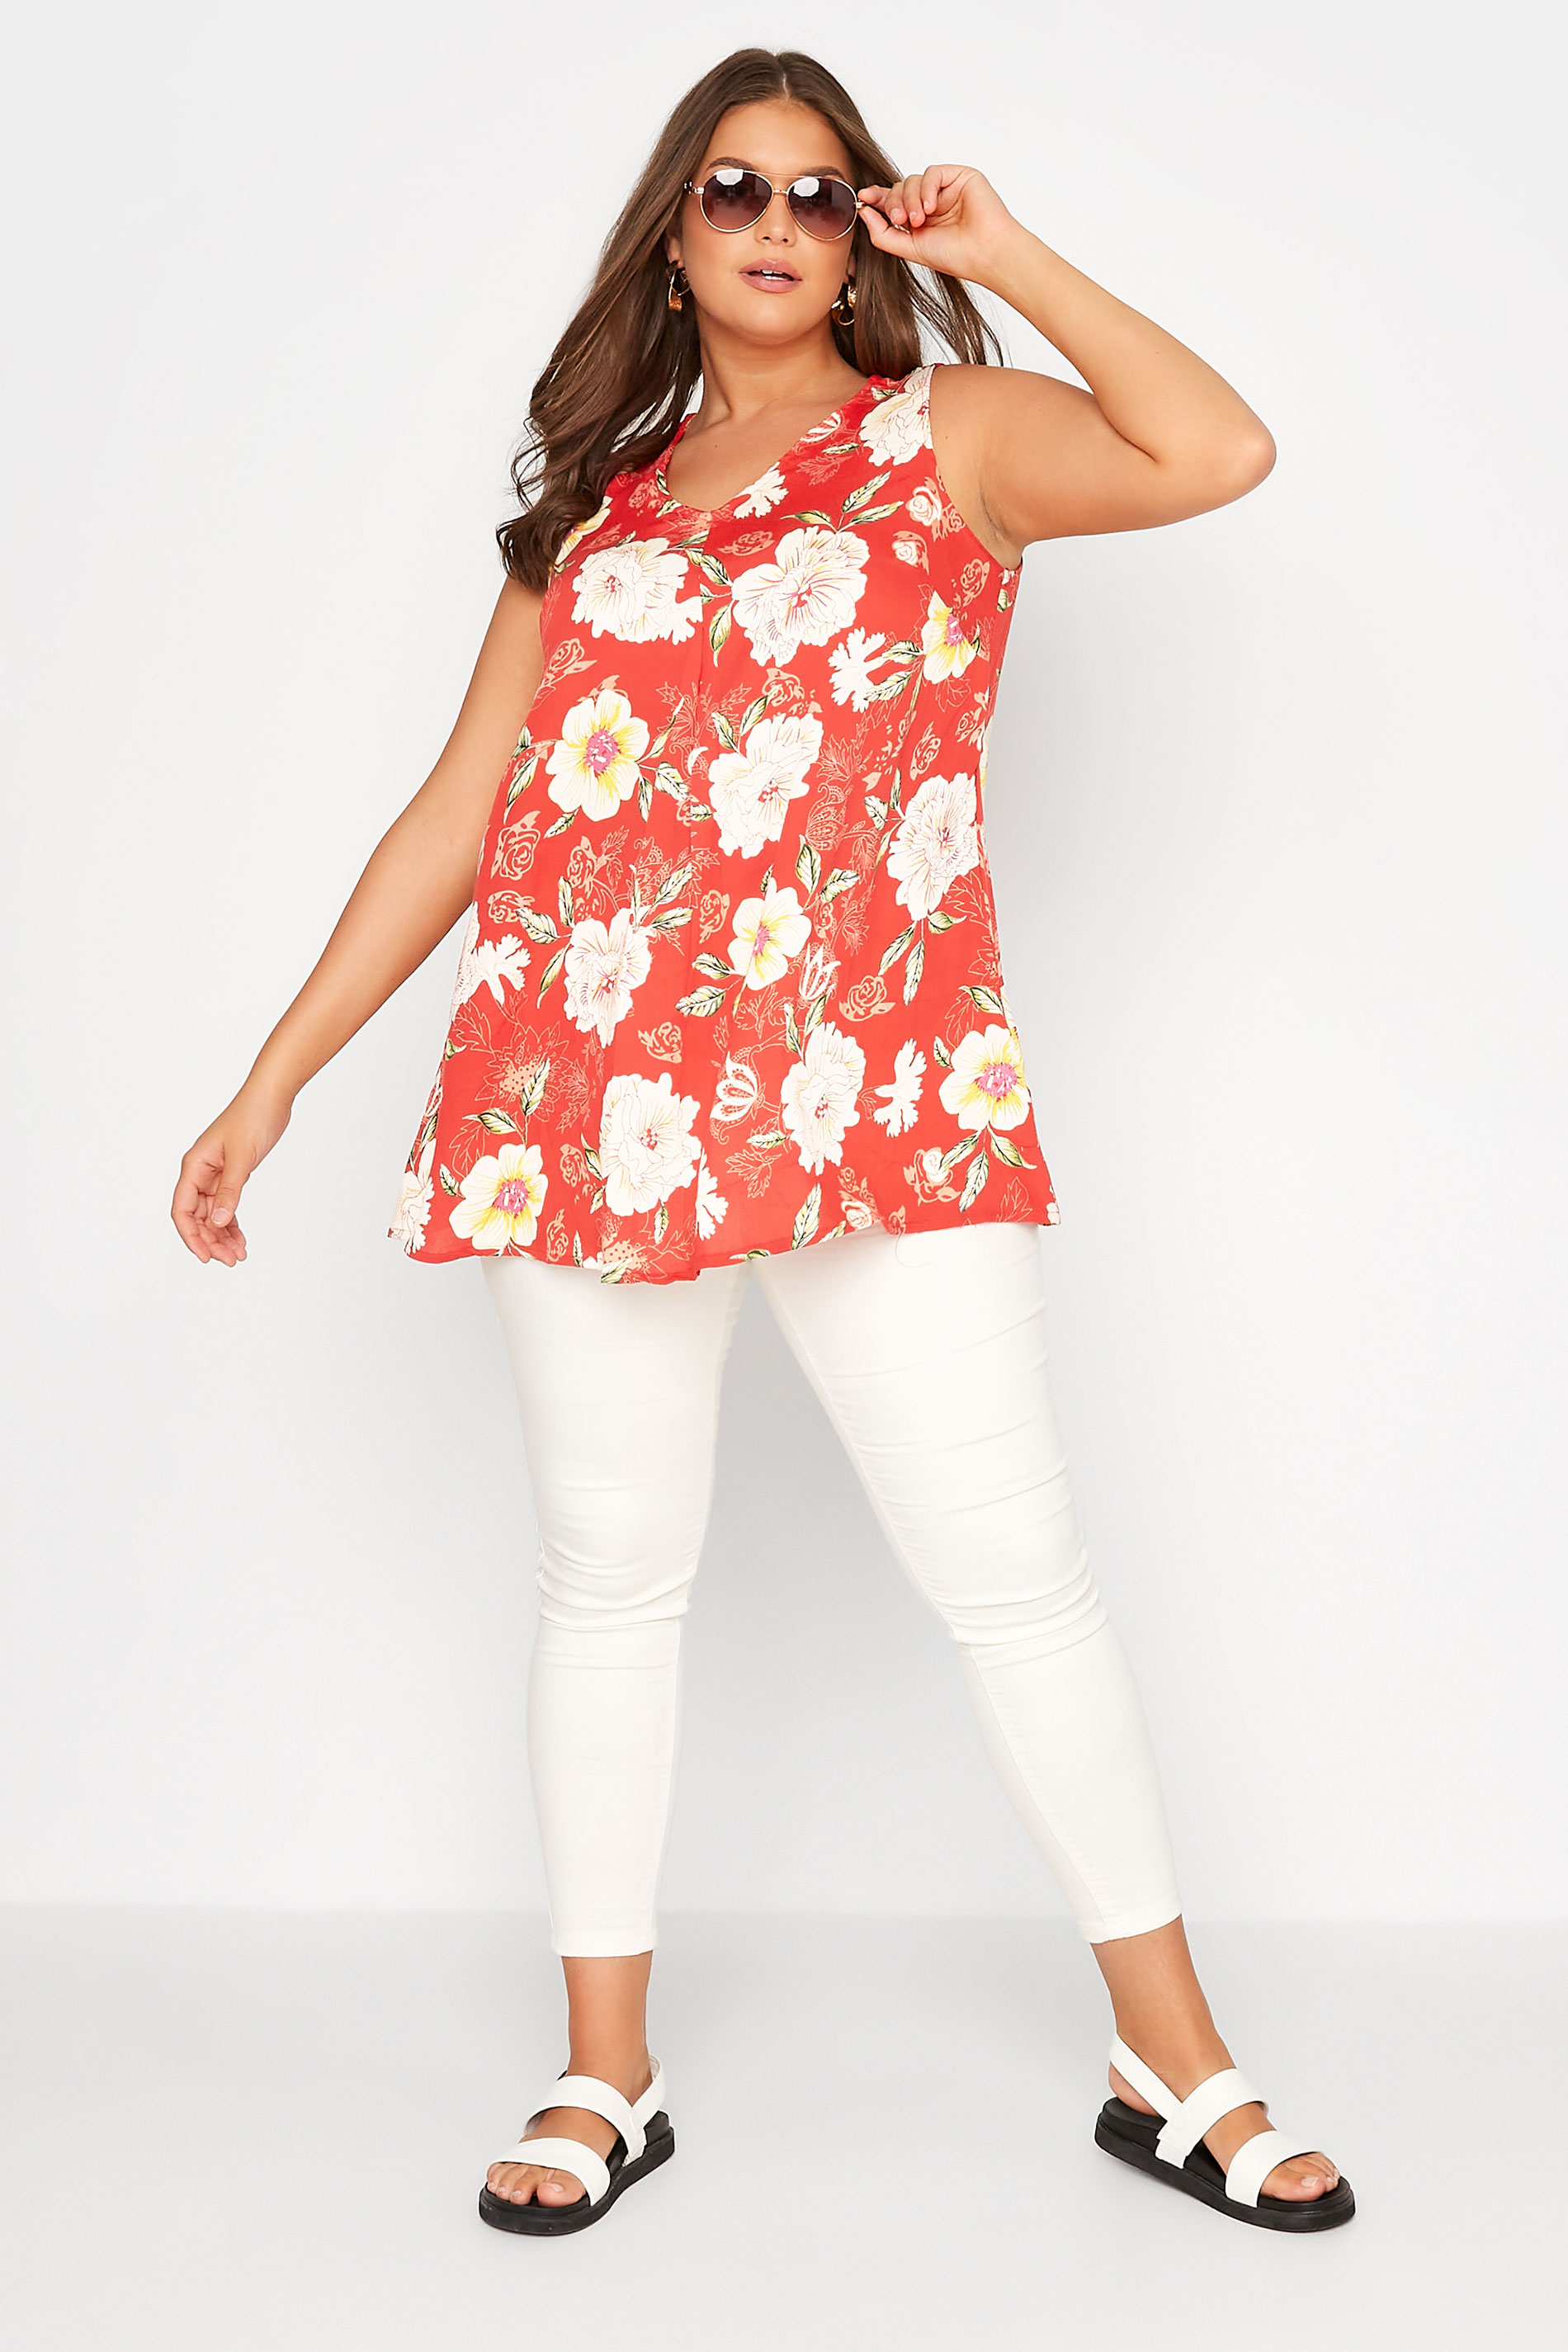 Grande taille  Tops Grande taille  Tops Casual | Curve Red Floral Swing Vest Top - XQ95308